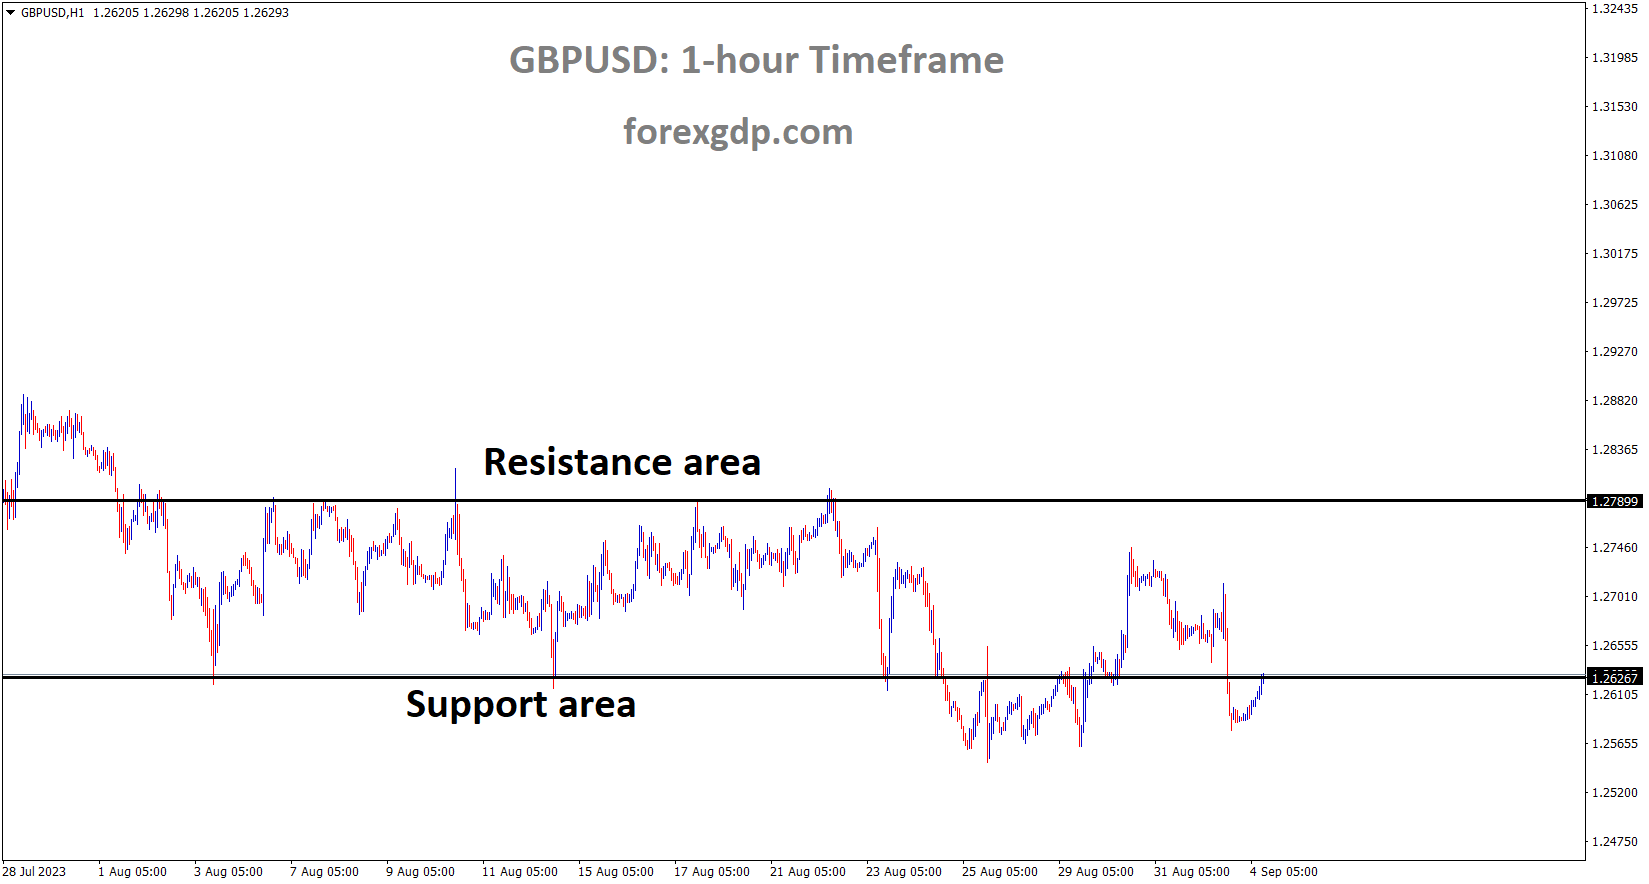 GBPUSD is moving in the Box pattern and the market has reached the horizontal support area of the pattern